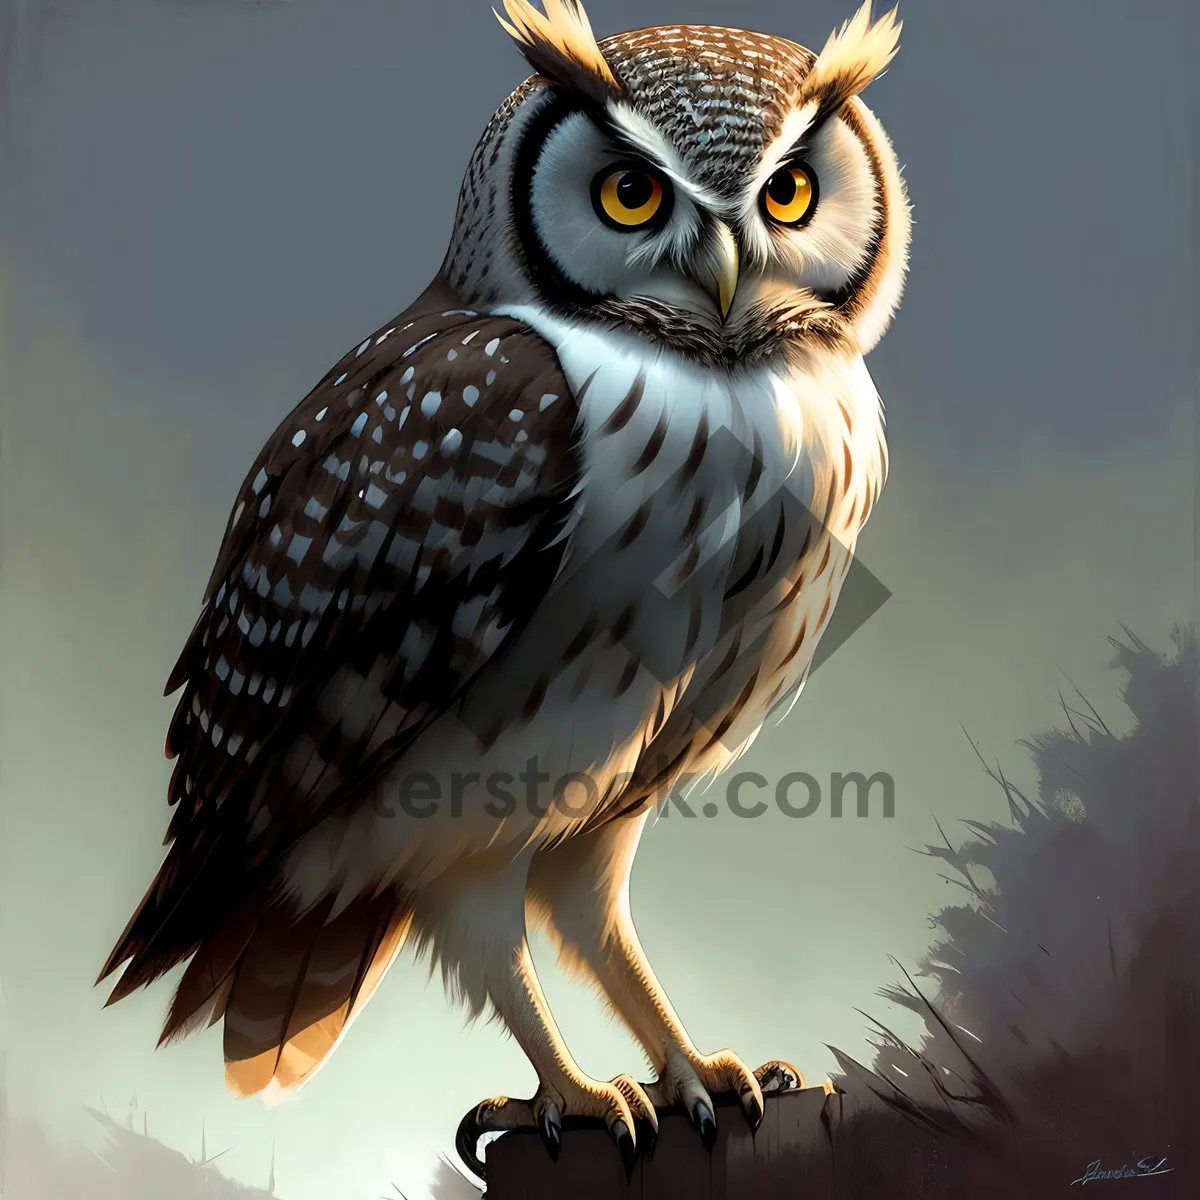 Picture of Intense Stare: Majestic Owl with Piercing Yellow Eyes